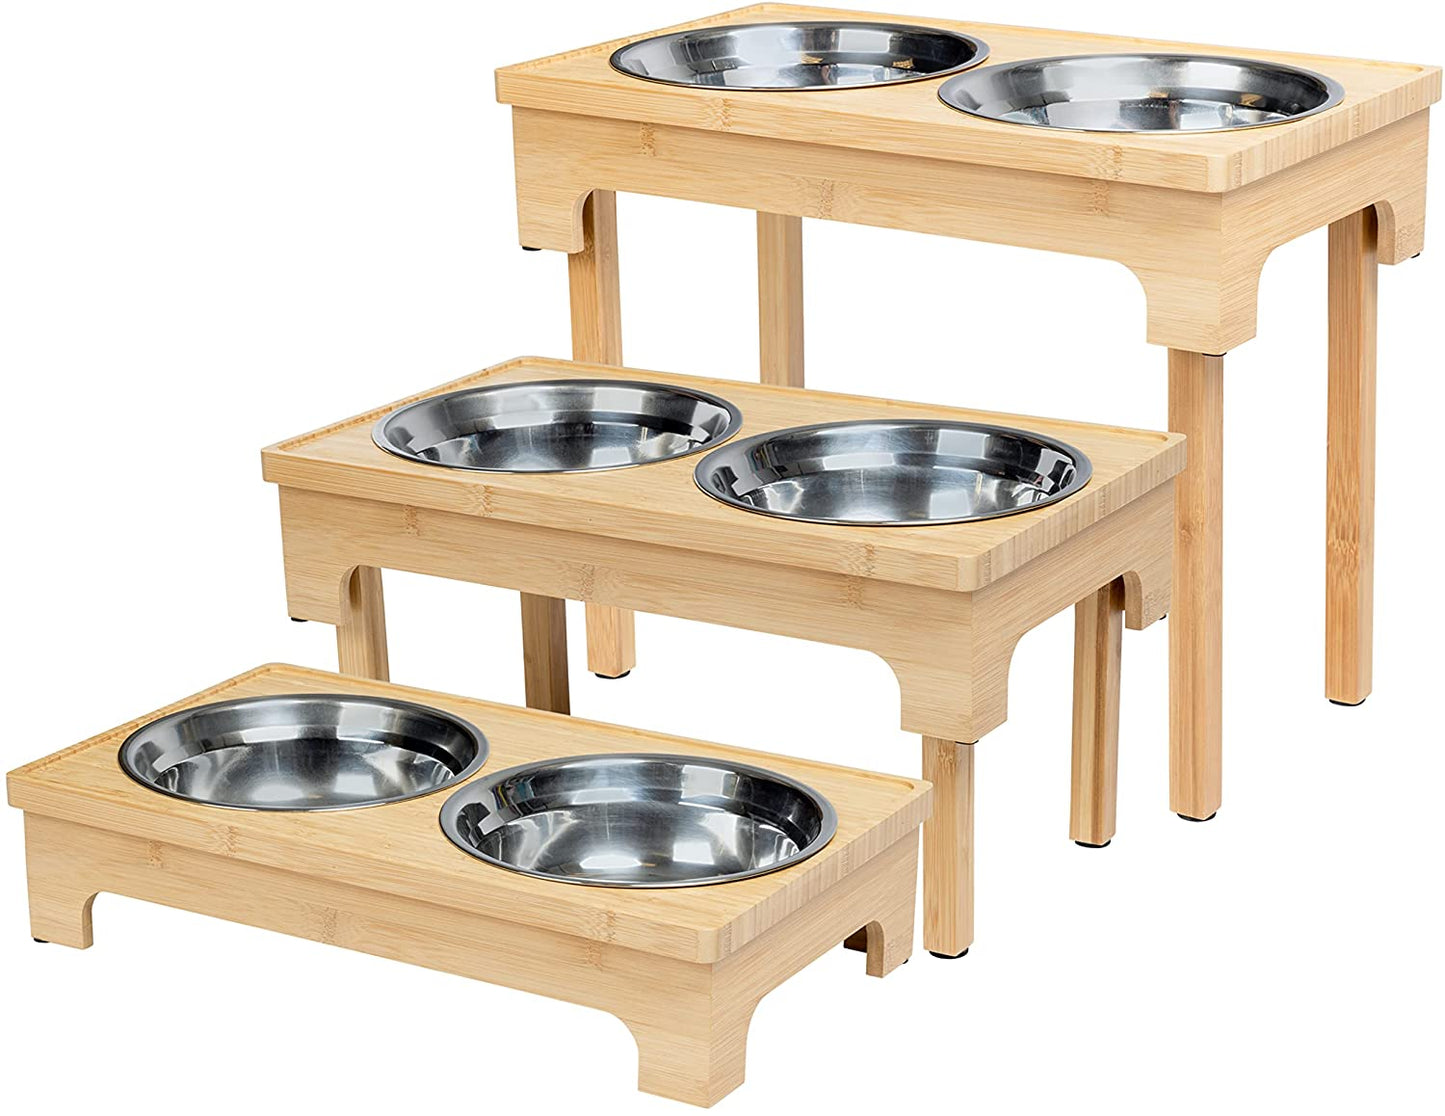 Bamboo Elevated Dog Bowls, Adjustable to 3", 8", and 12" Height